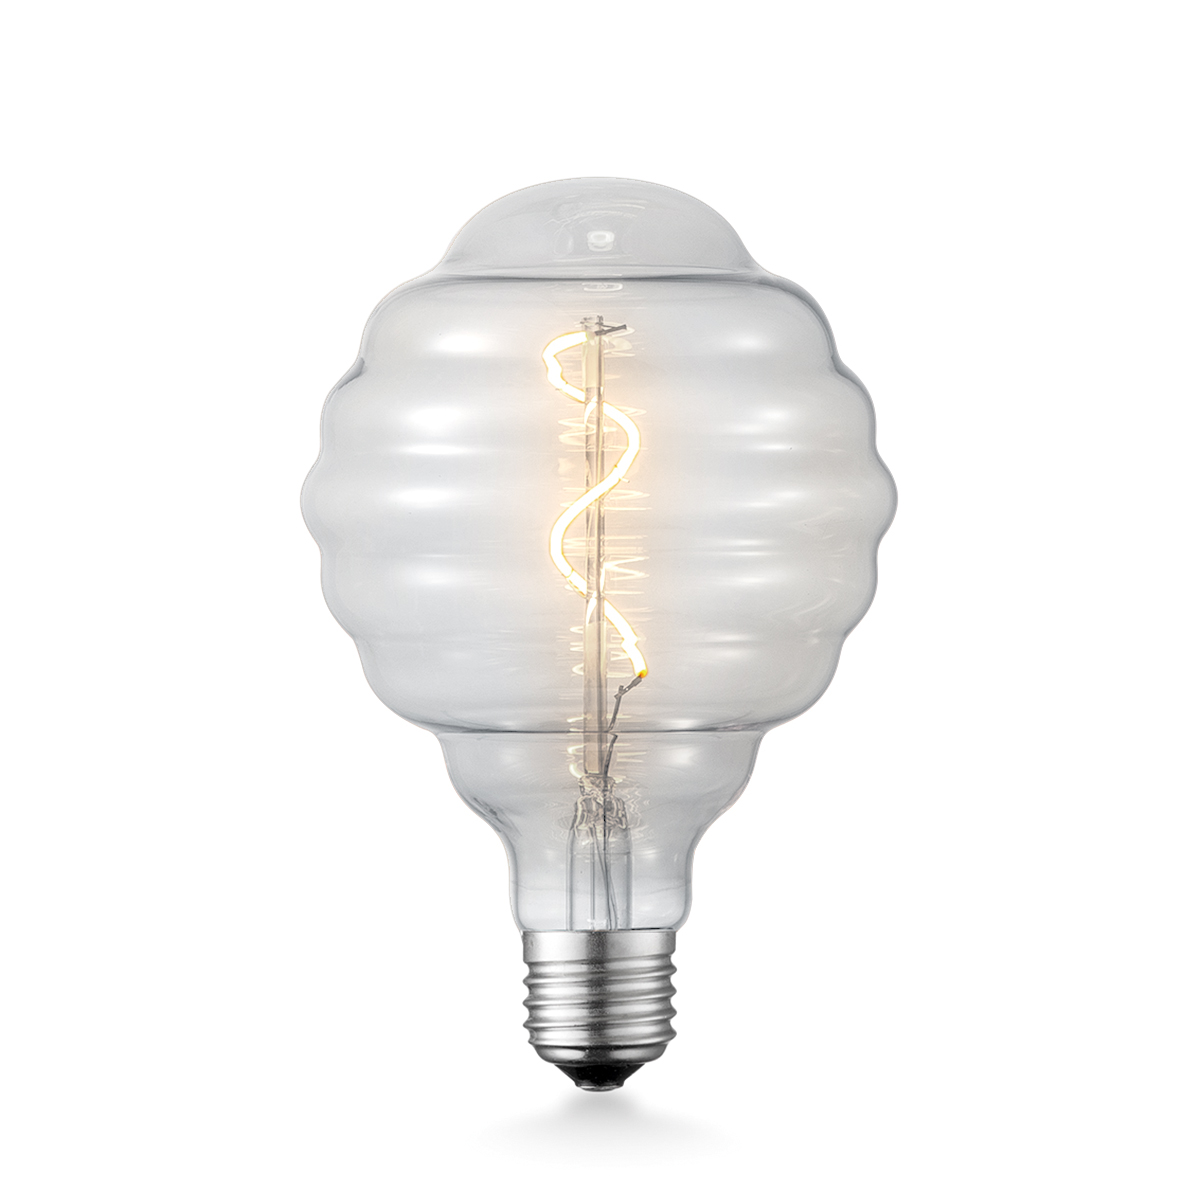 LED Bulb Single Spiral filament - special clear